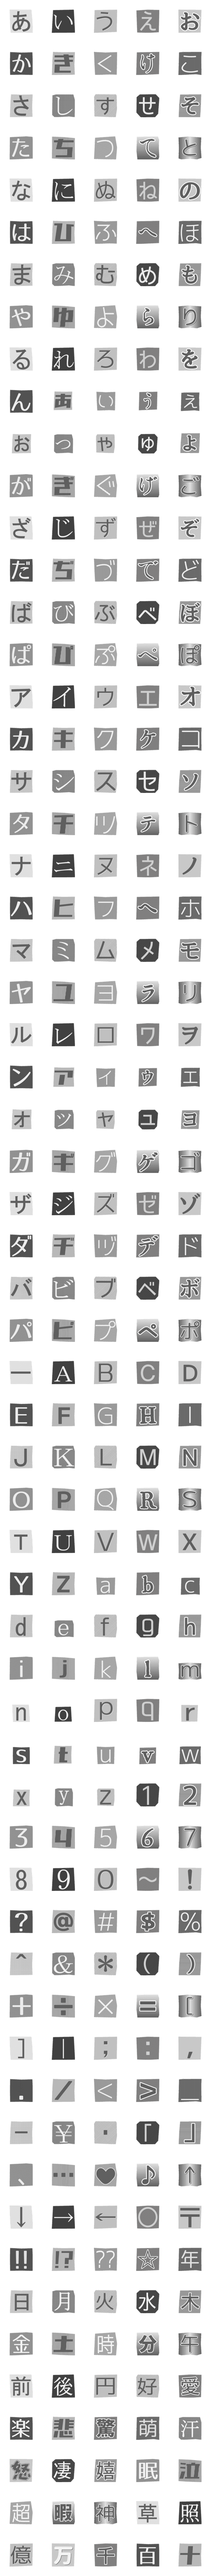 [LINE絵文字]切り抜き絵文字の画像一覧